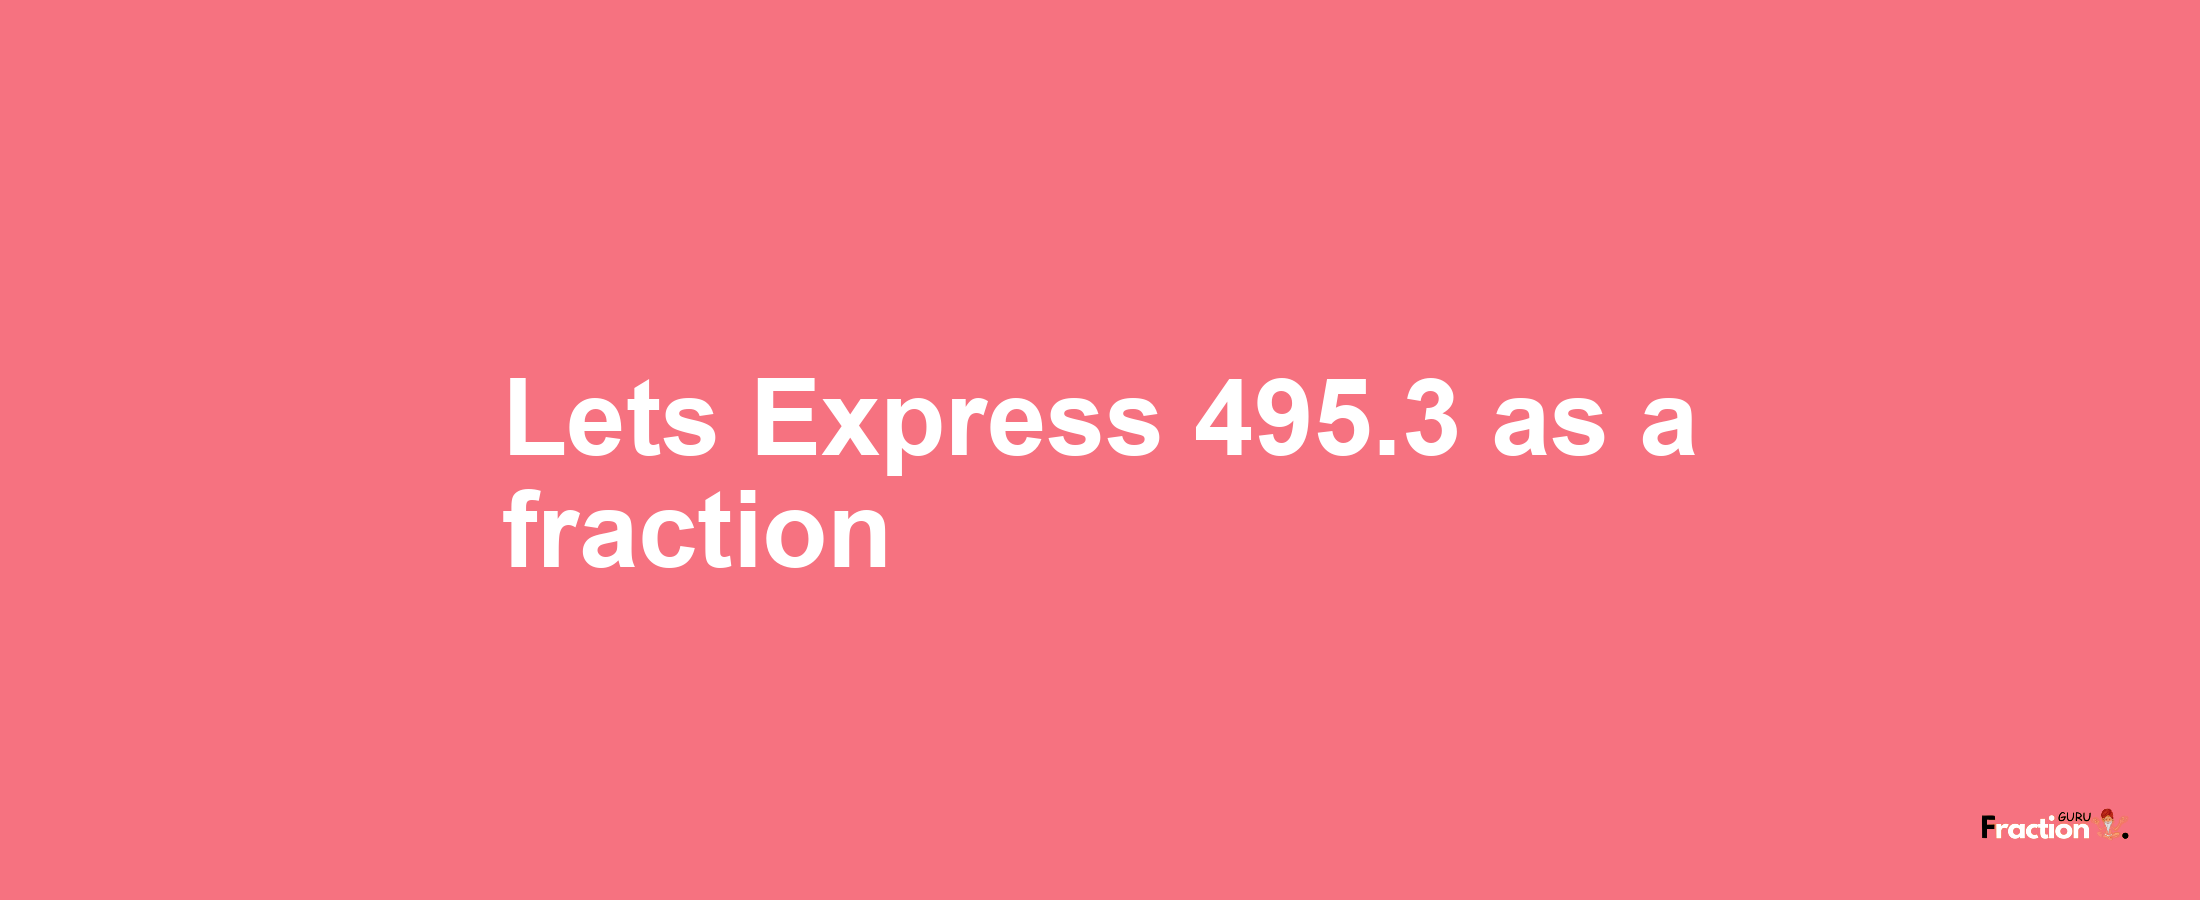 Lets Express 495.3 as afraction